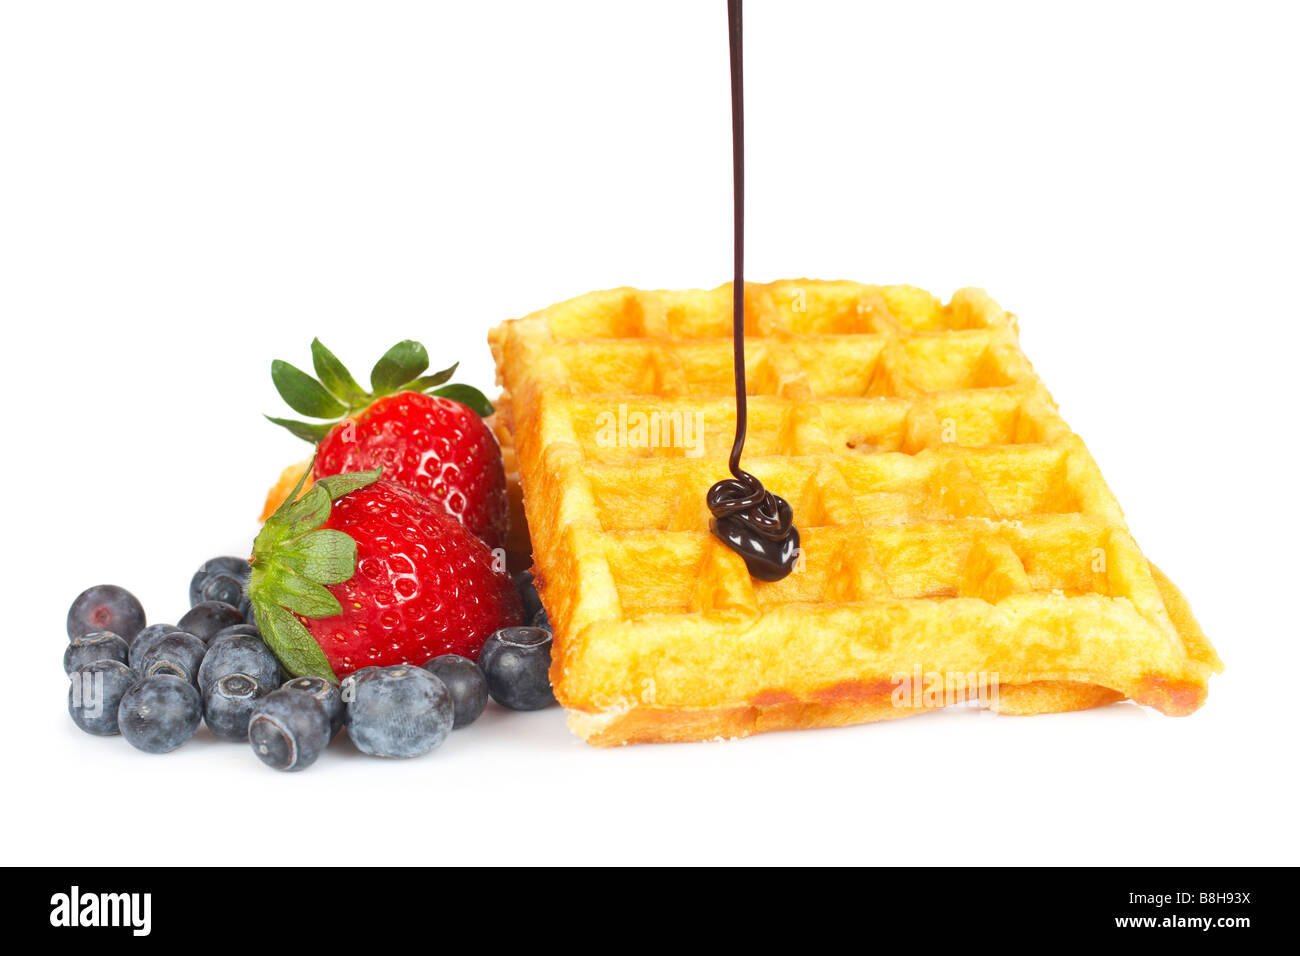 Chocolate syrup being poured over a waffles with blueberries and strawberries on a white background Stock Photo